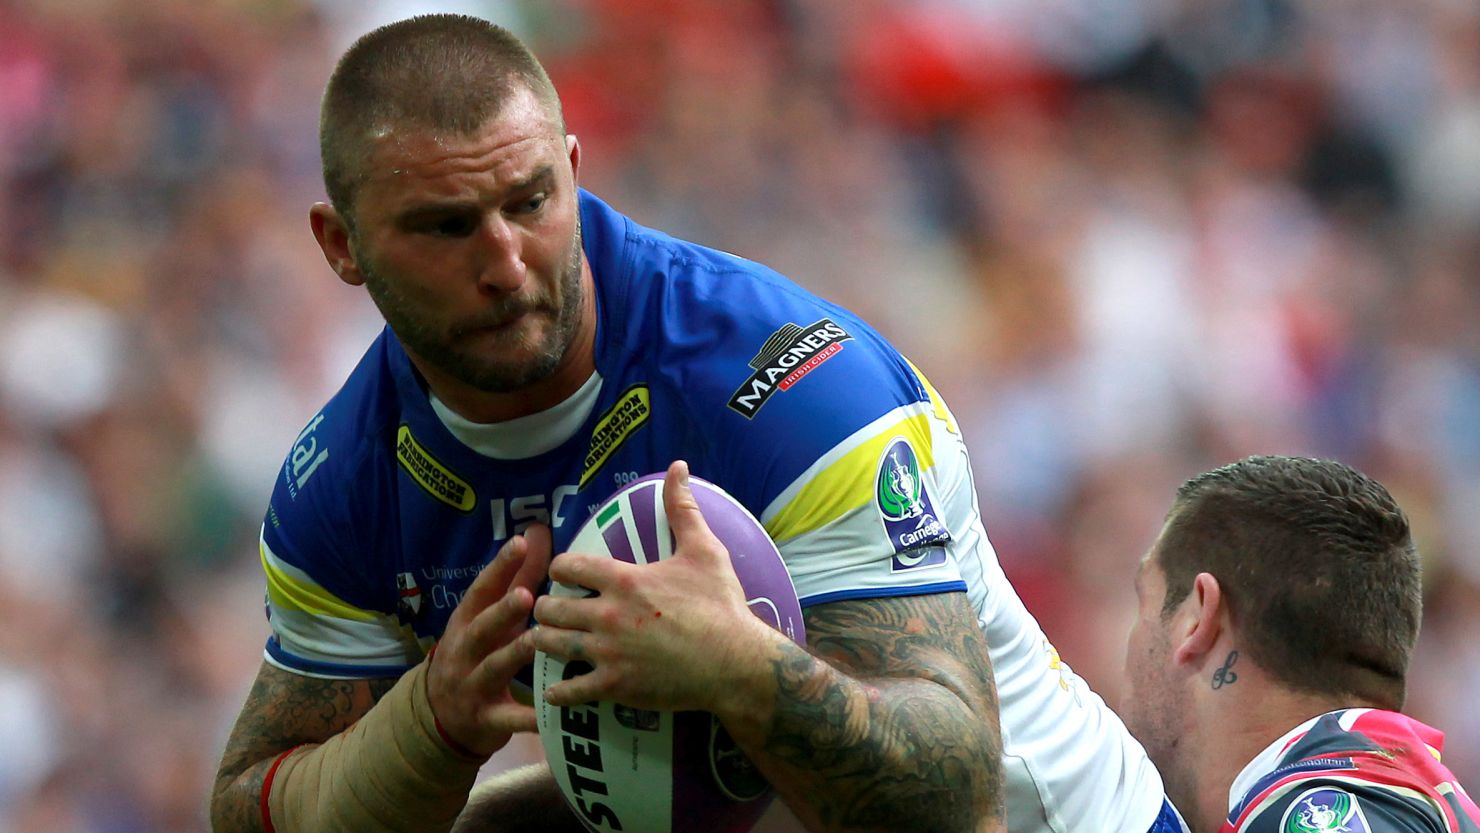 Warrington Wolves player Paul Wood played on despite rupturing a testicle.